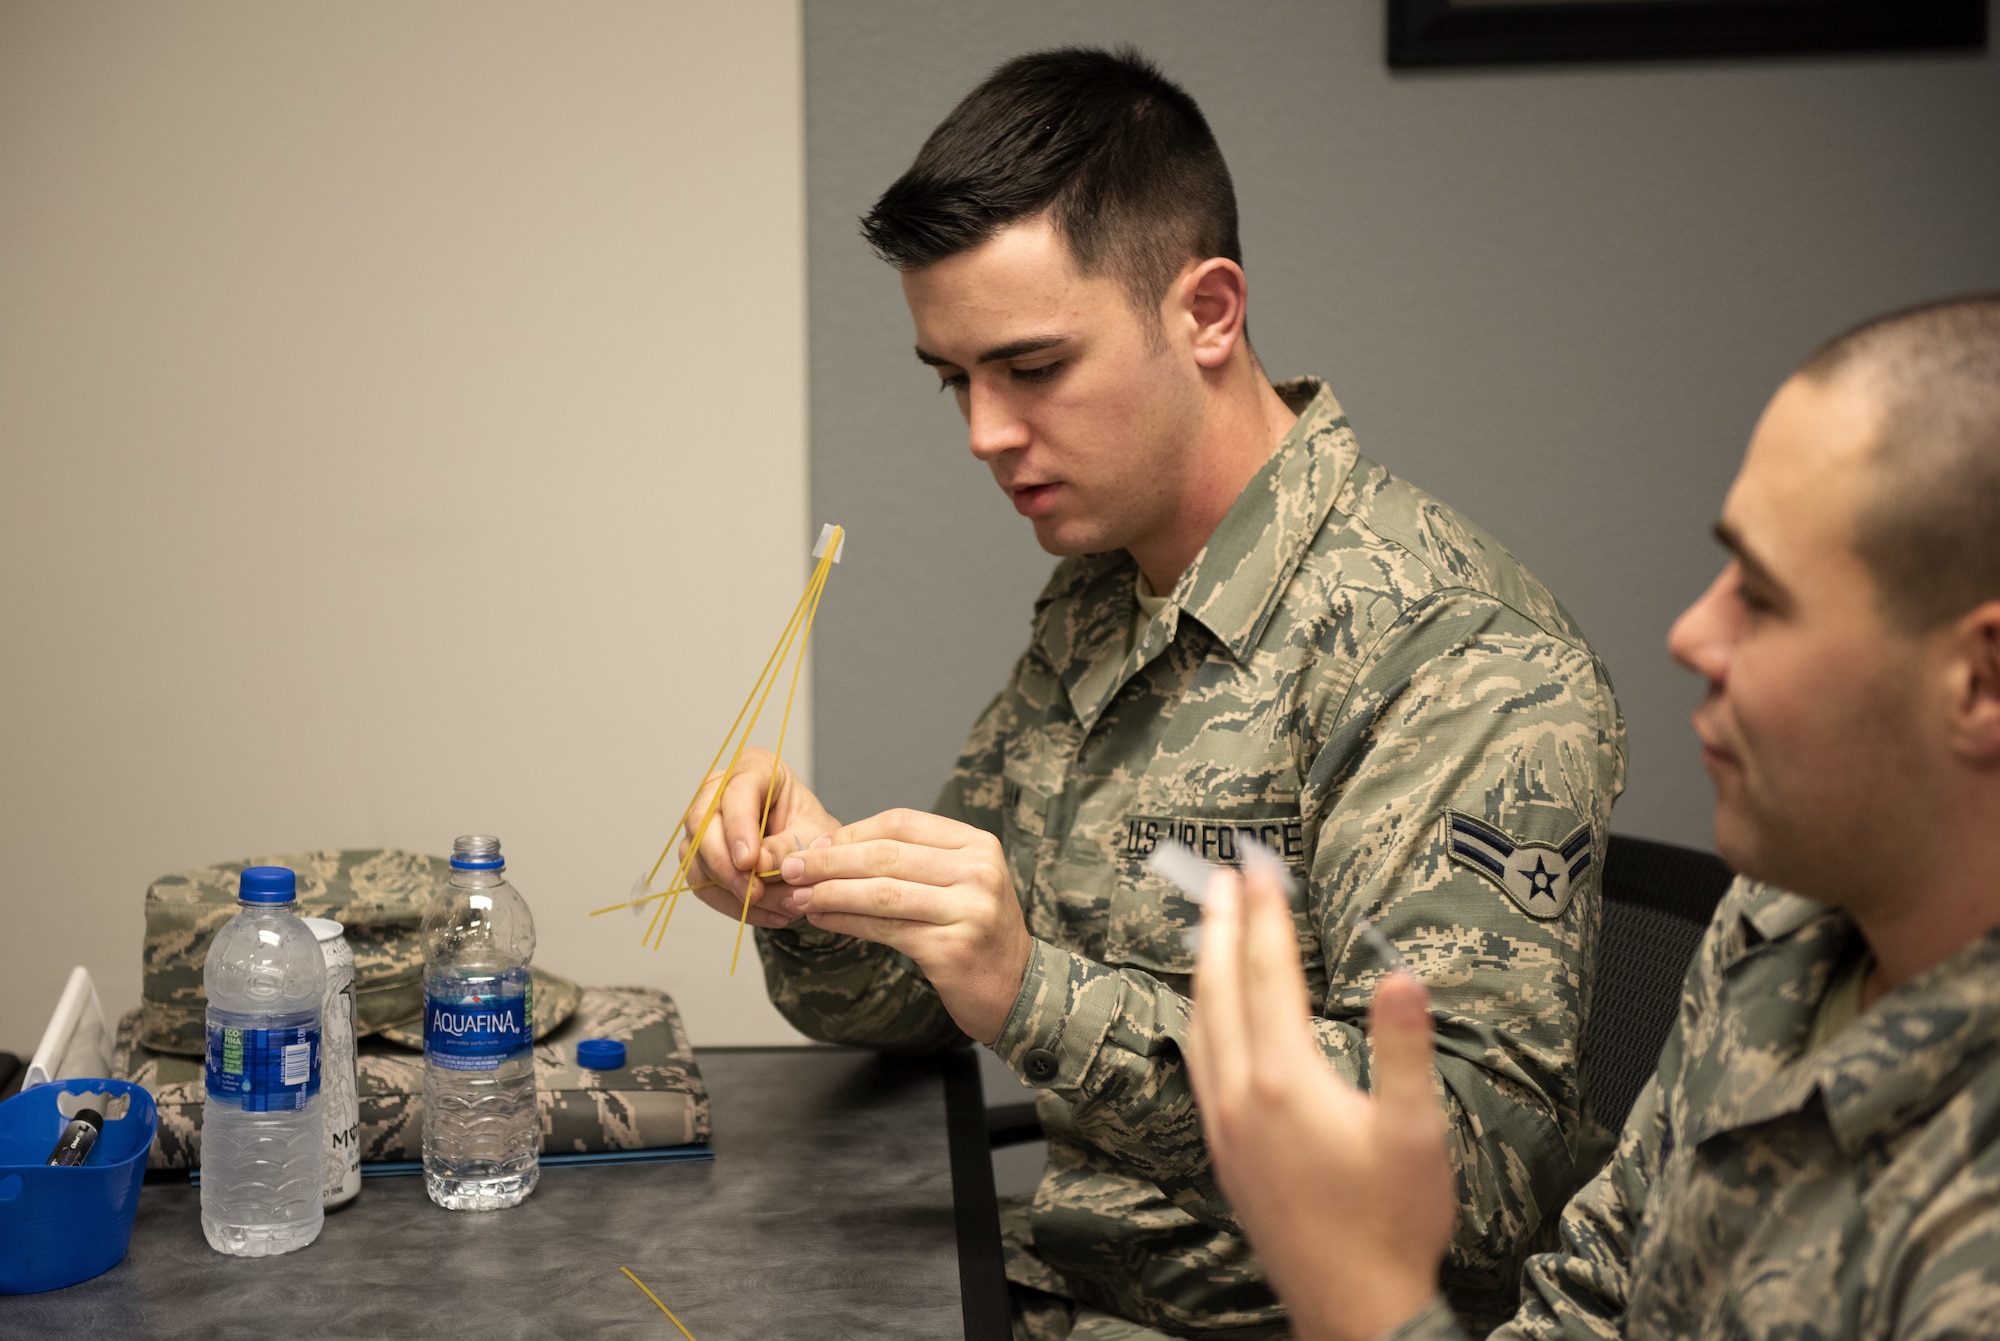 Airman 1st Class Dallas Ketcham, left, 60th Maintenance Squadron fuels systems apprentice, works with Airman Brandon Mc Entire, 60th MXS Precision Measurements and Equipment laboratory apprentice, during a competition with the First Term Airman Course class Jan. 10, 2019, at Travis Air Force Base, Calif. Airmen attend FTAC to help transition from the technical training atmosphere to the operational Air Force. (U.S. Air Force photo by Airman 1st Class Jonathon Carnell)